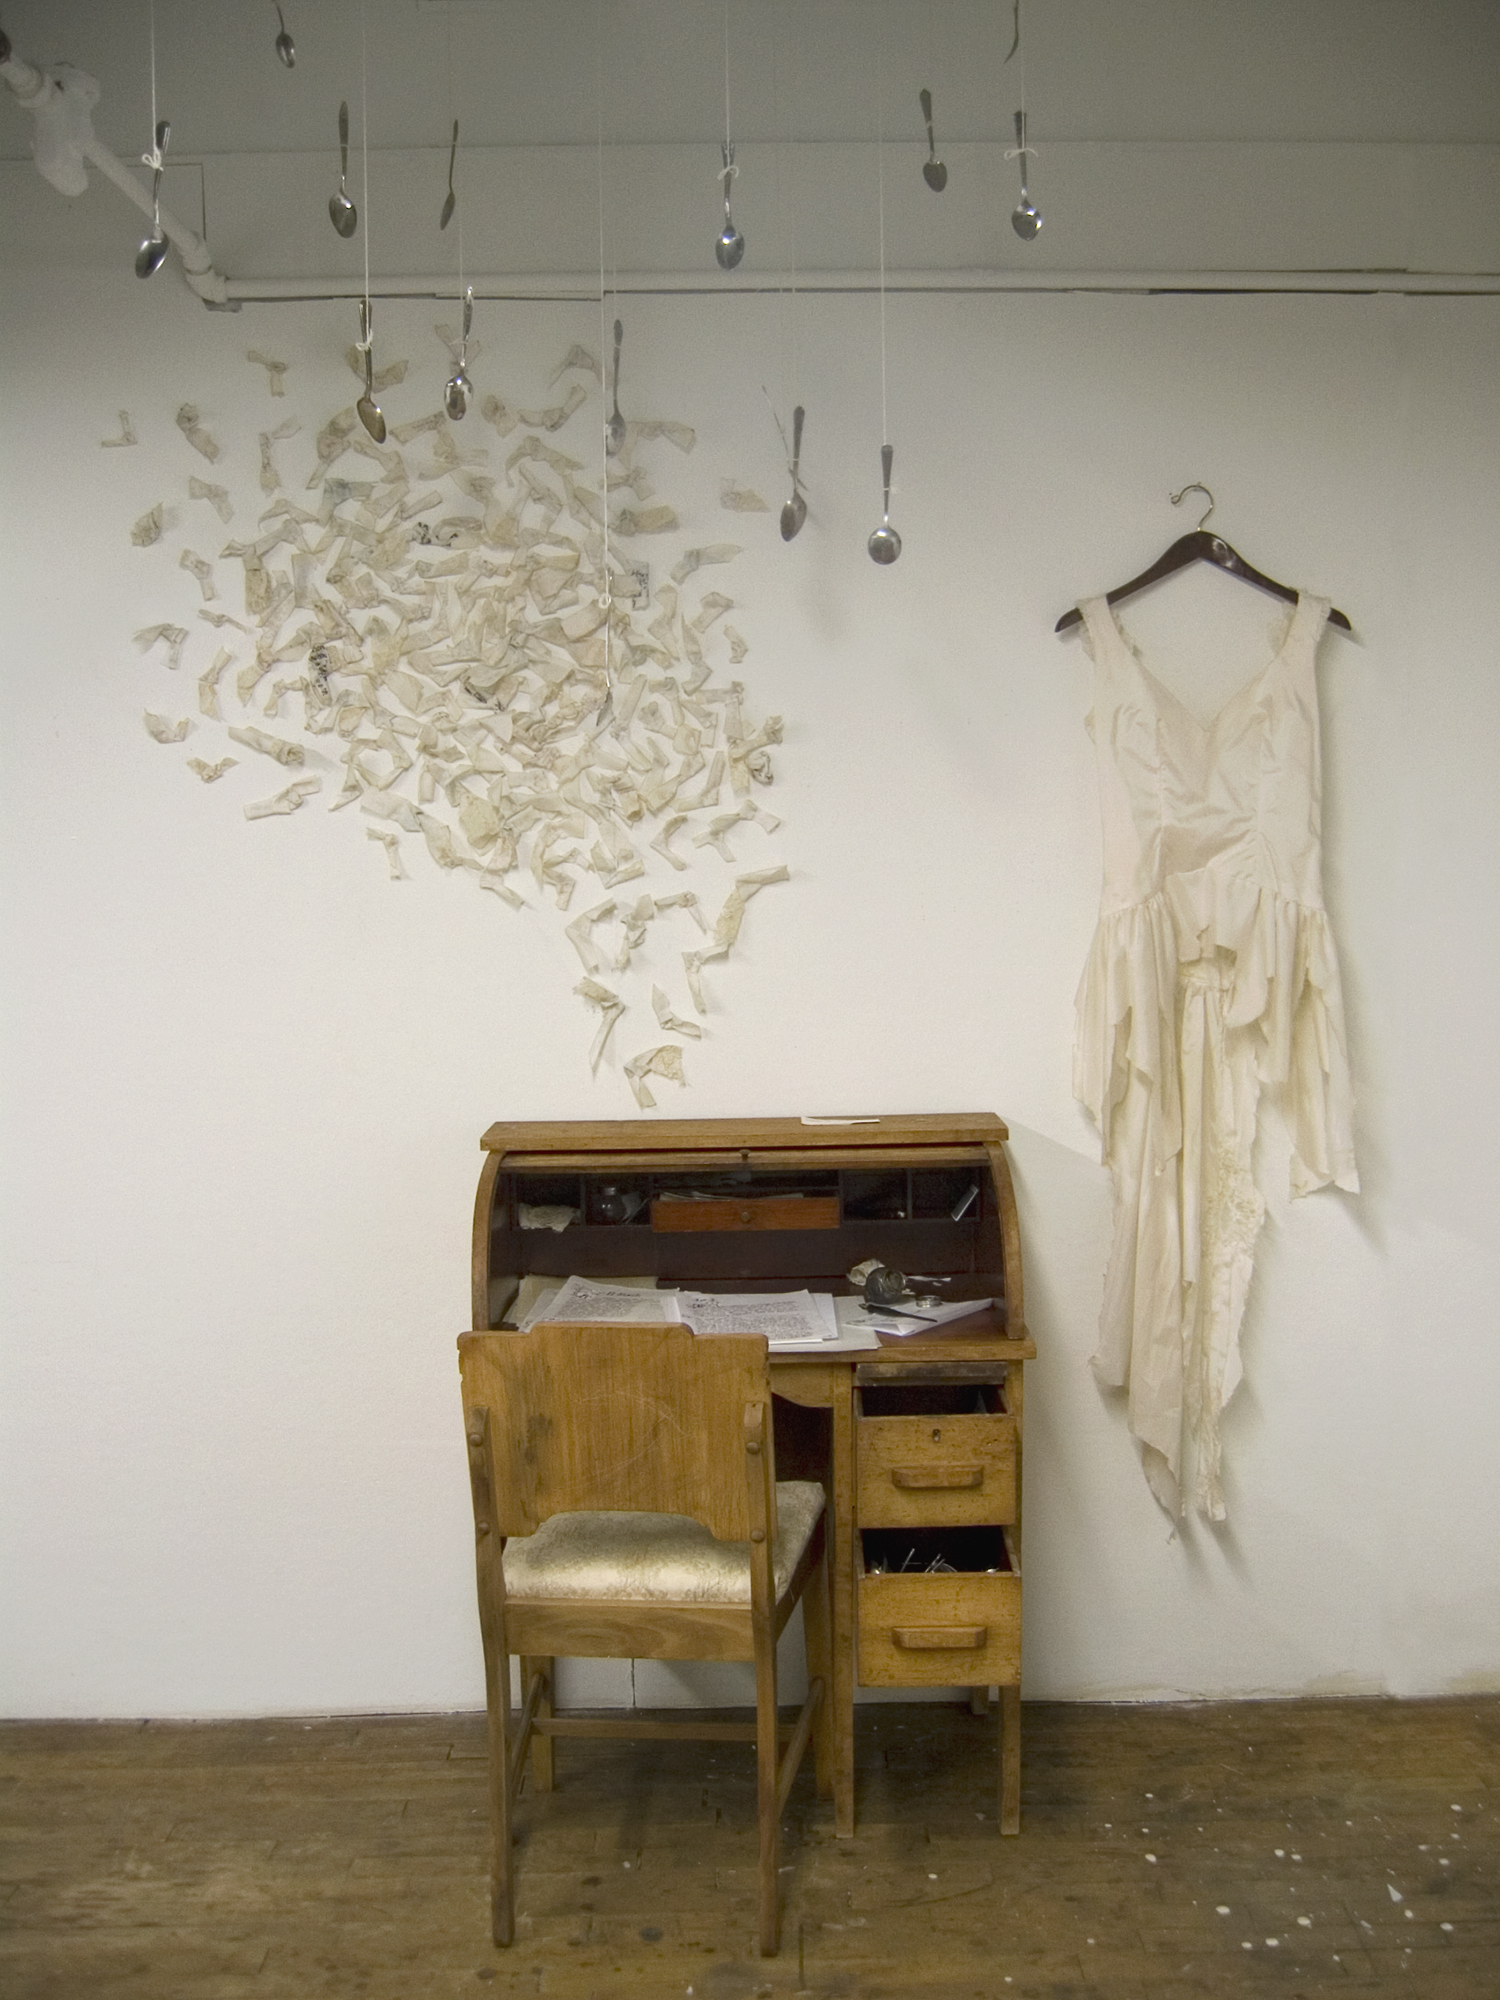    Seshat’s desk with gossiping swarm   , 2008, desk, fabric, objects, 7.5 h x 8 h x 3 h feet  